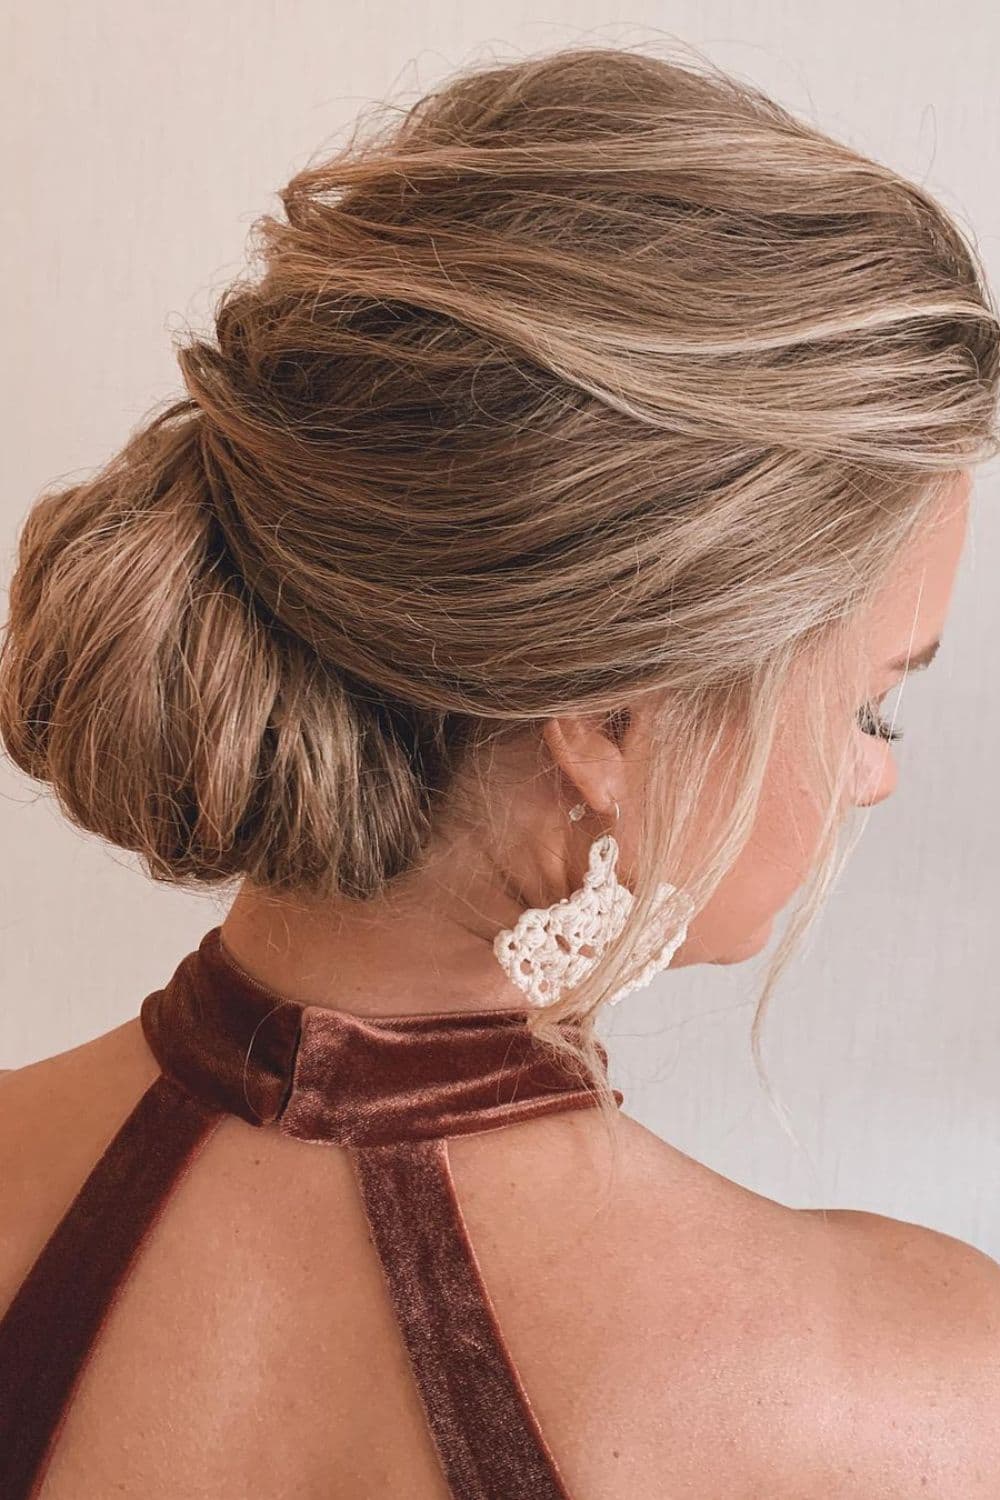 A woman with a blonde rolled low bun hairstyle.